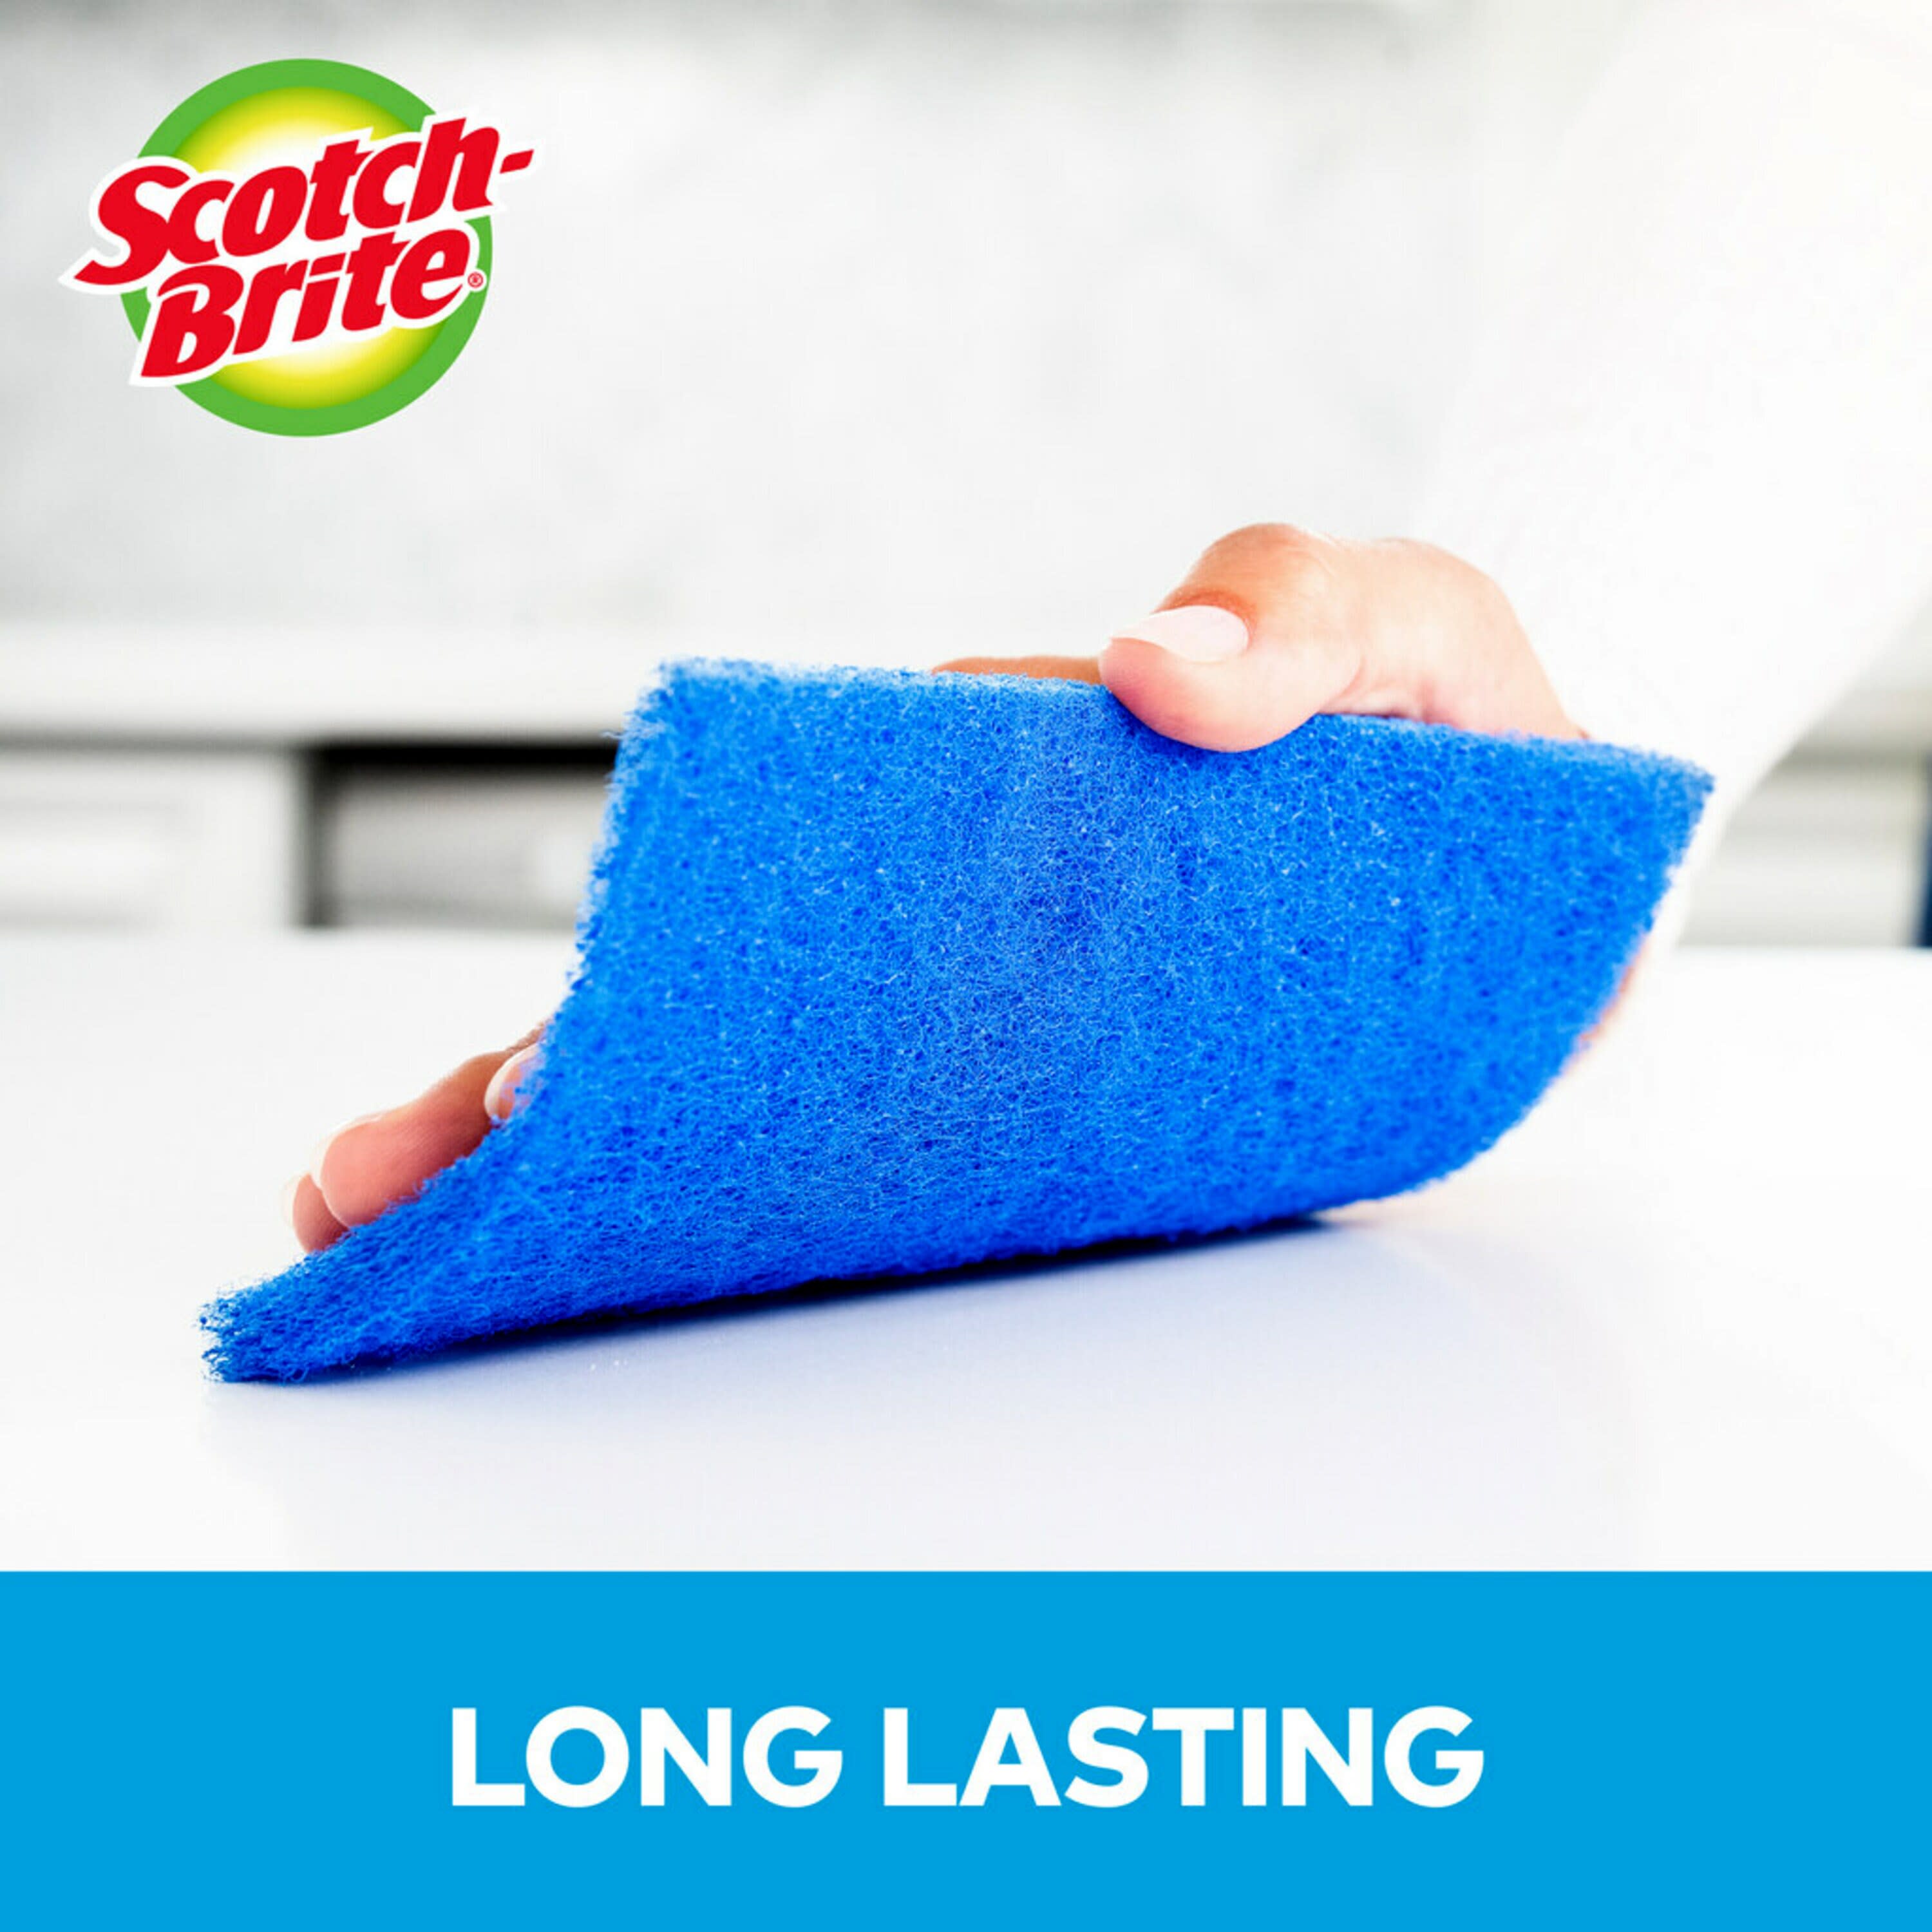 3M Scotch-Brite™ Low Scratch Pads For Fryer Cleaning Tool